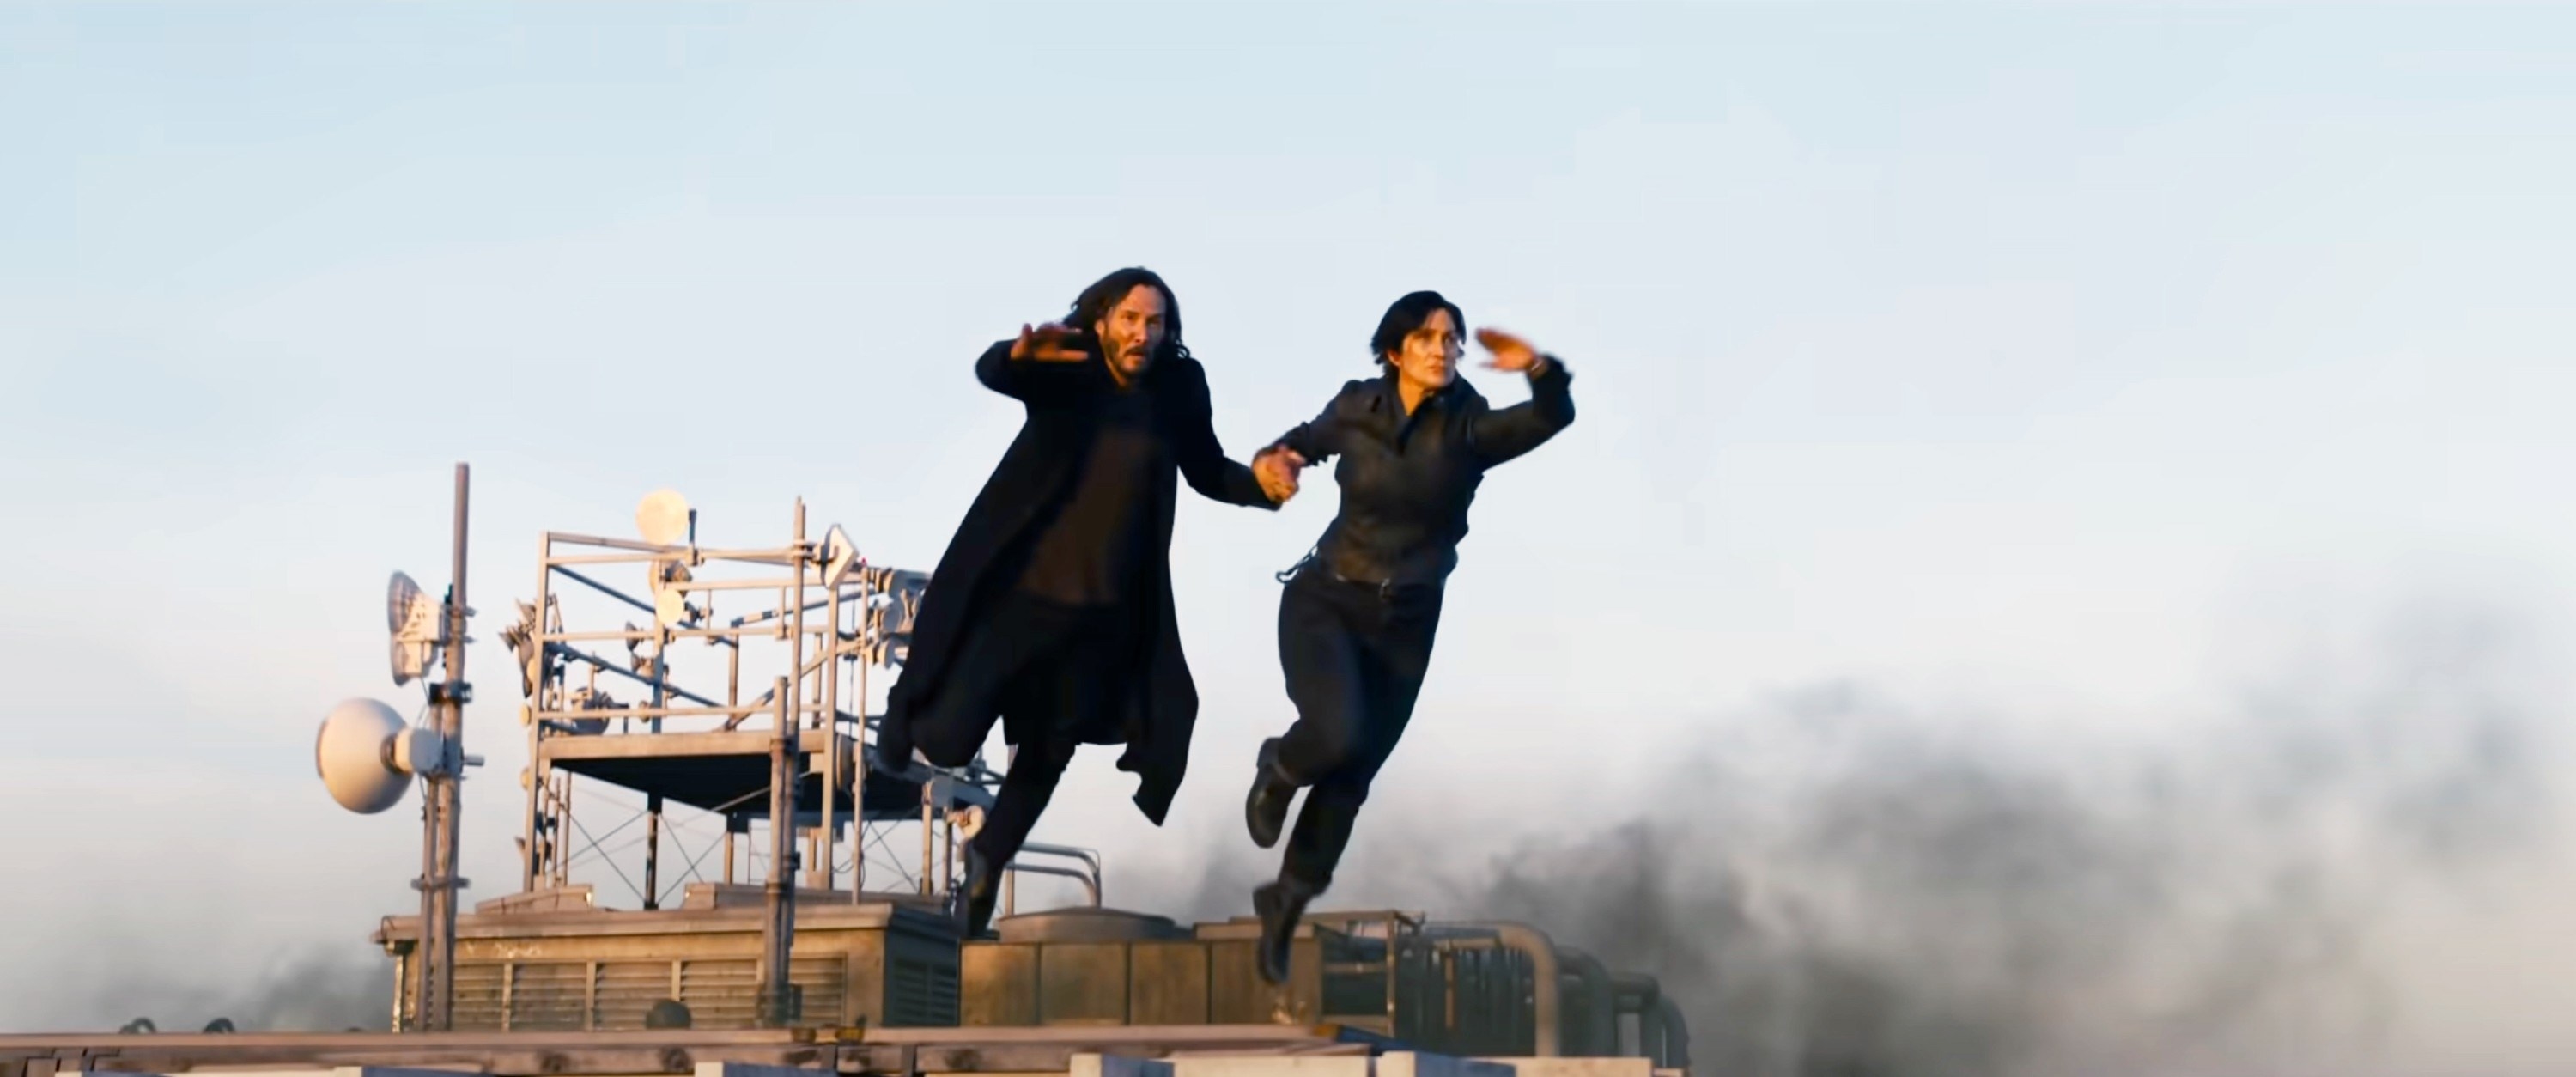 Keanu Reeves and Carrie-Anne Moss dive from the roof of a building